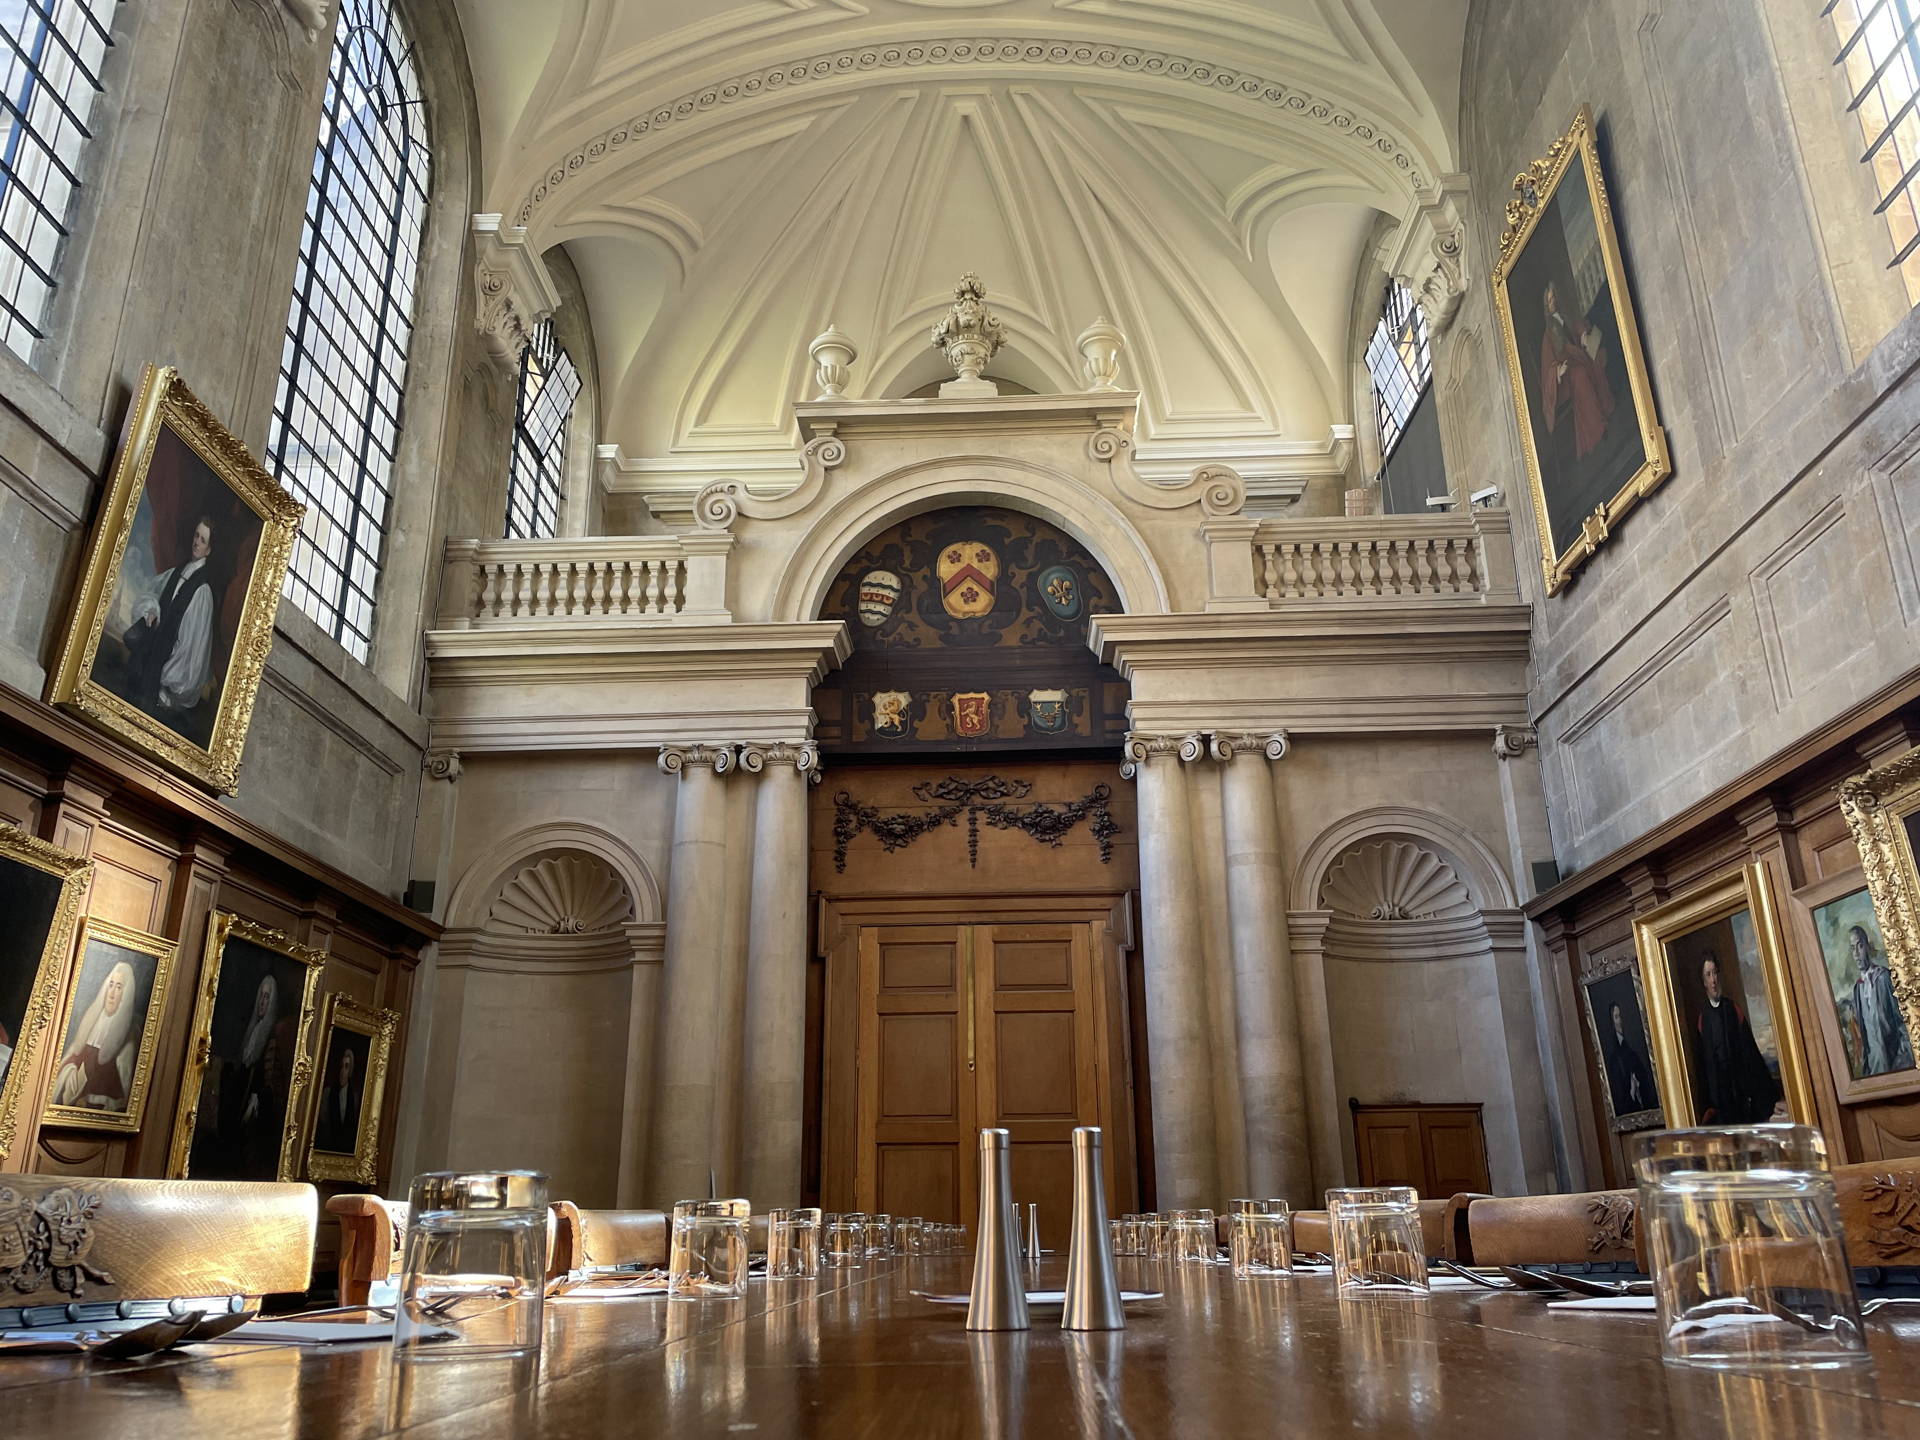 Sennheiser SpeechLine Digital Wireless restores usability to All Souls College’s remarkable 15th century meeting room